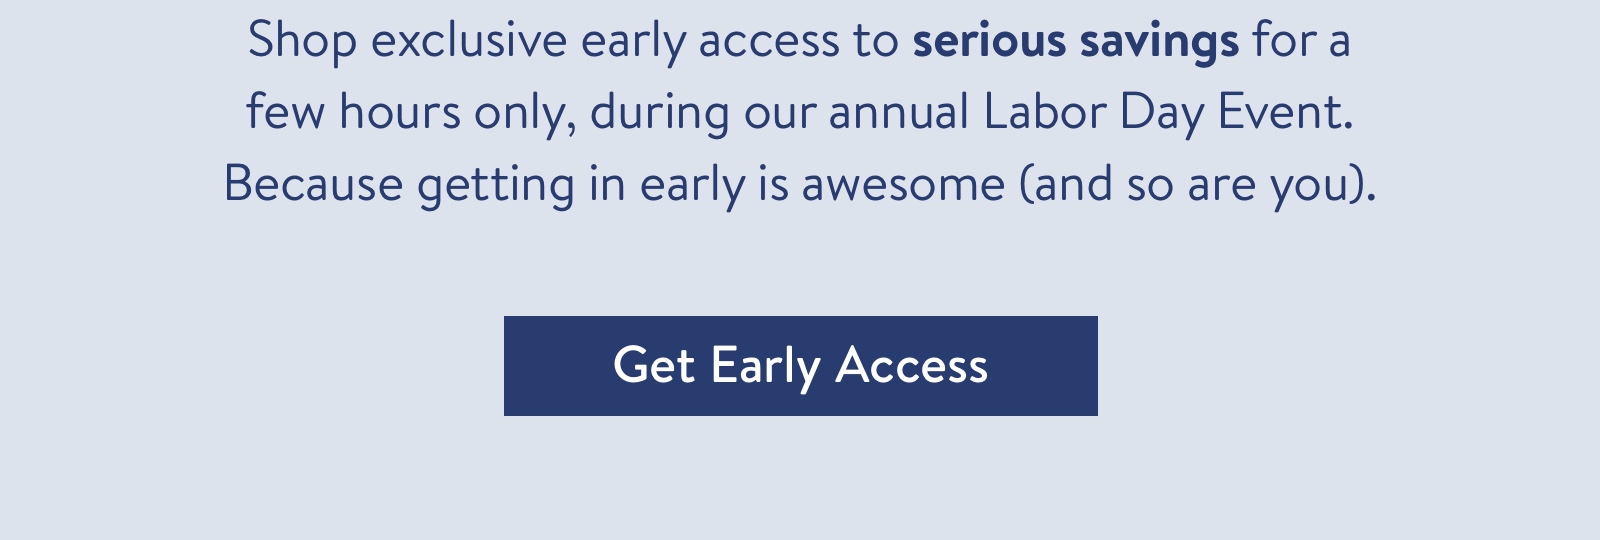 Shop exclusive early access to serious savings for a few hours only, during our annual Labor Day Event. Because getting in early is awesome (and so are you).